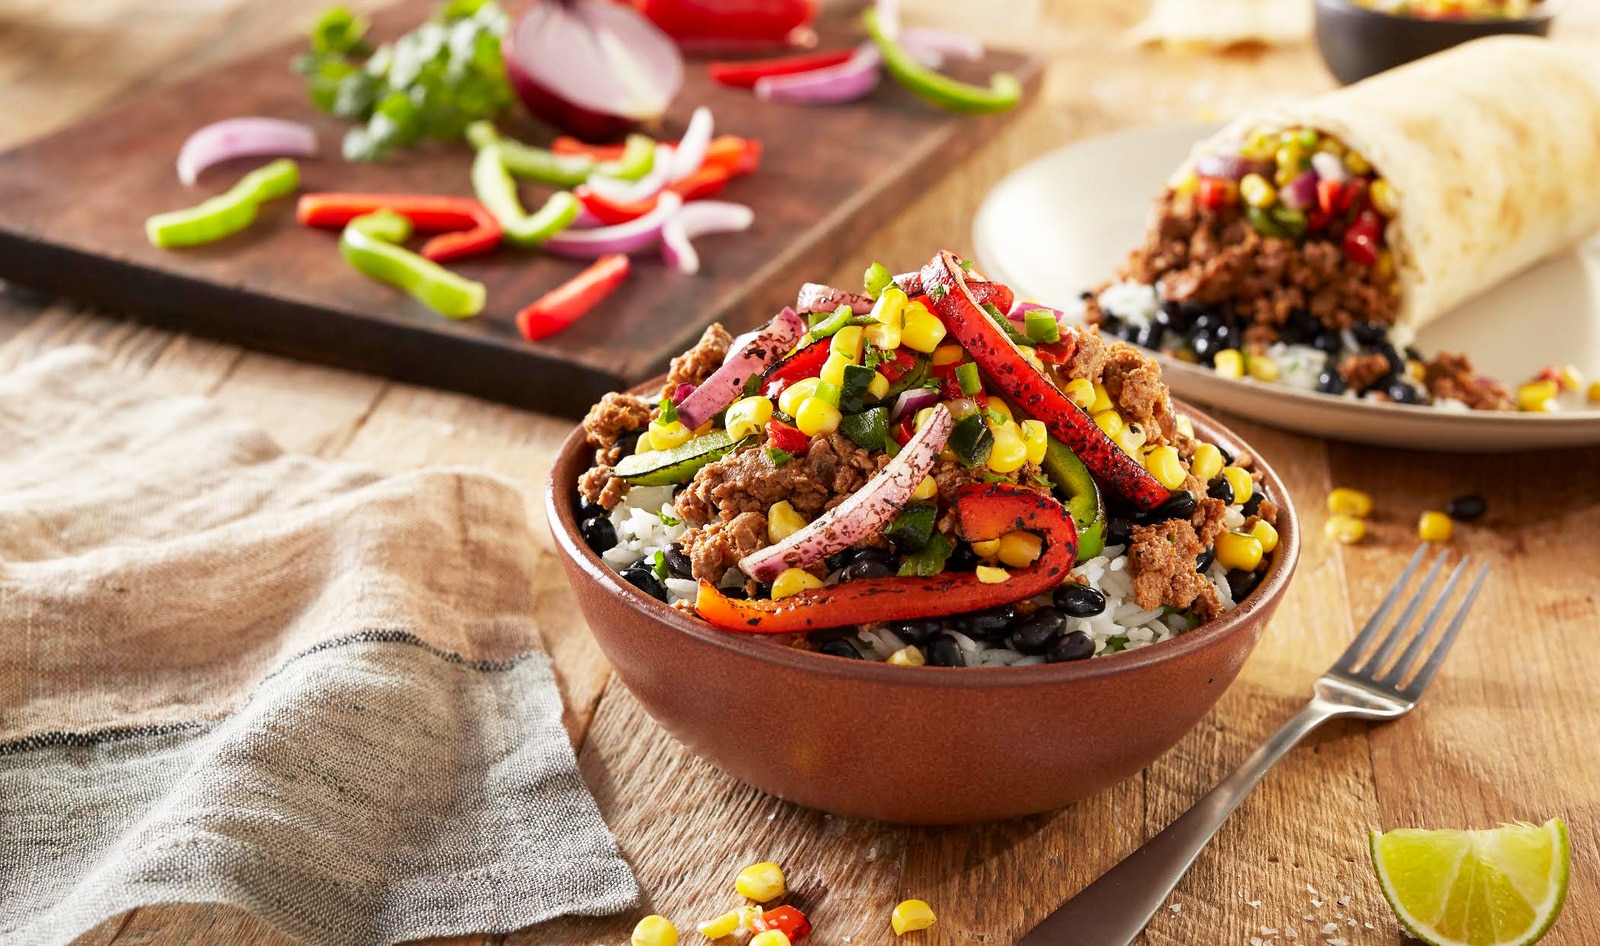 QDOBA Adds Plant-Based Impossible Meat to Menus in Canada